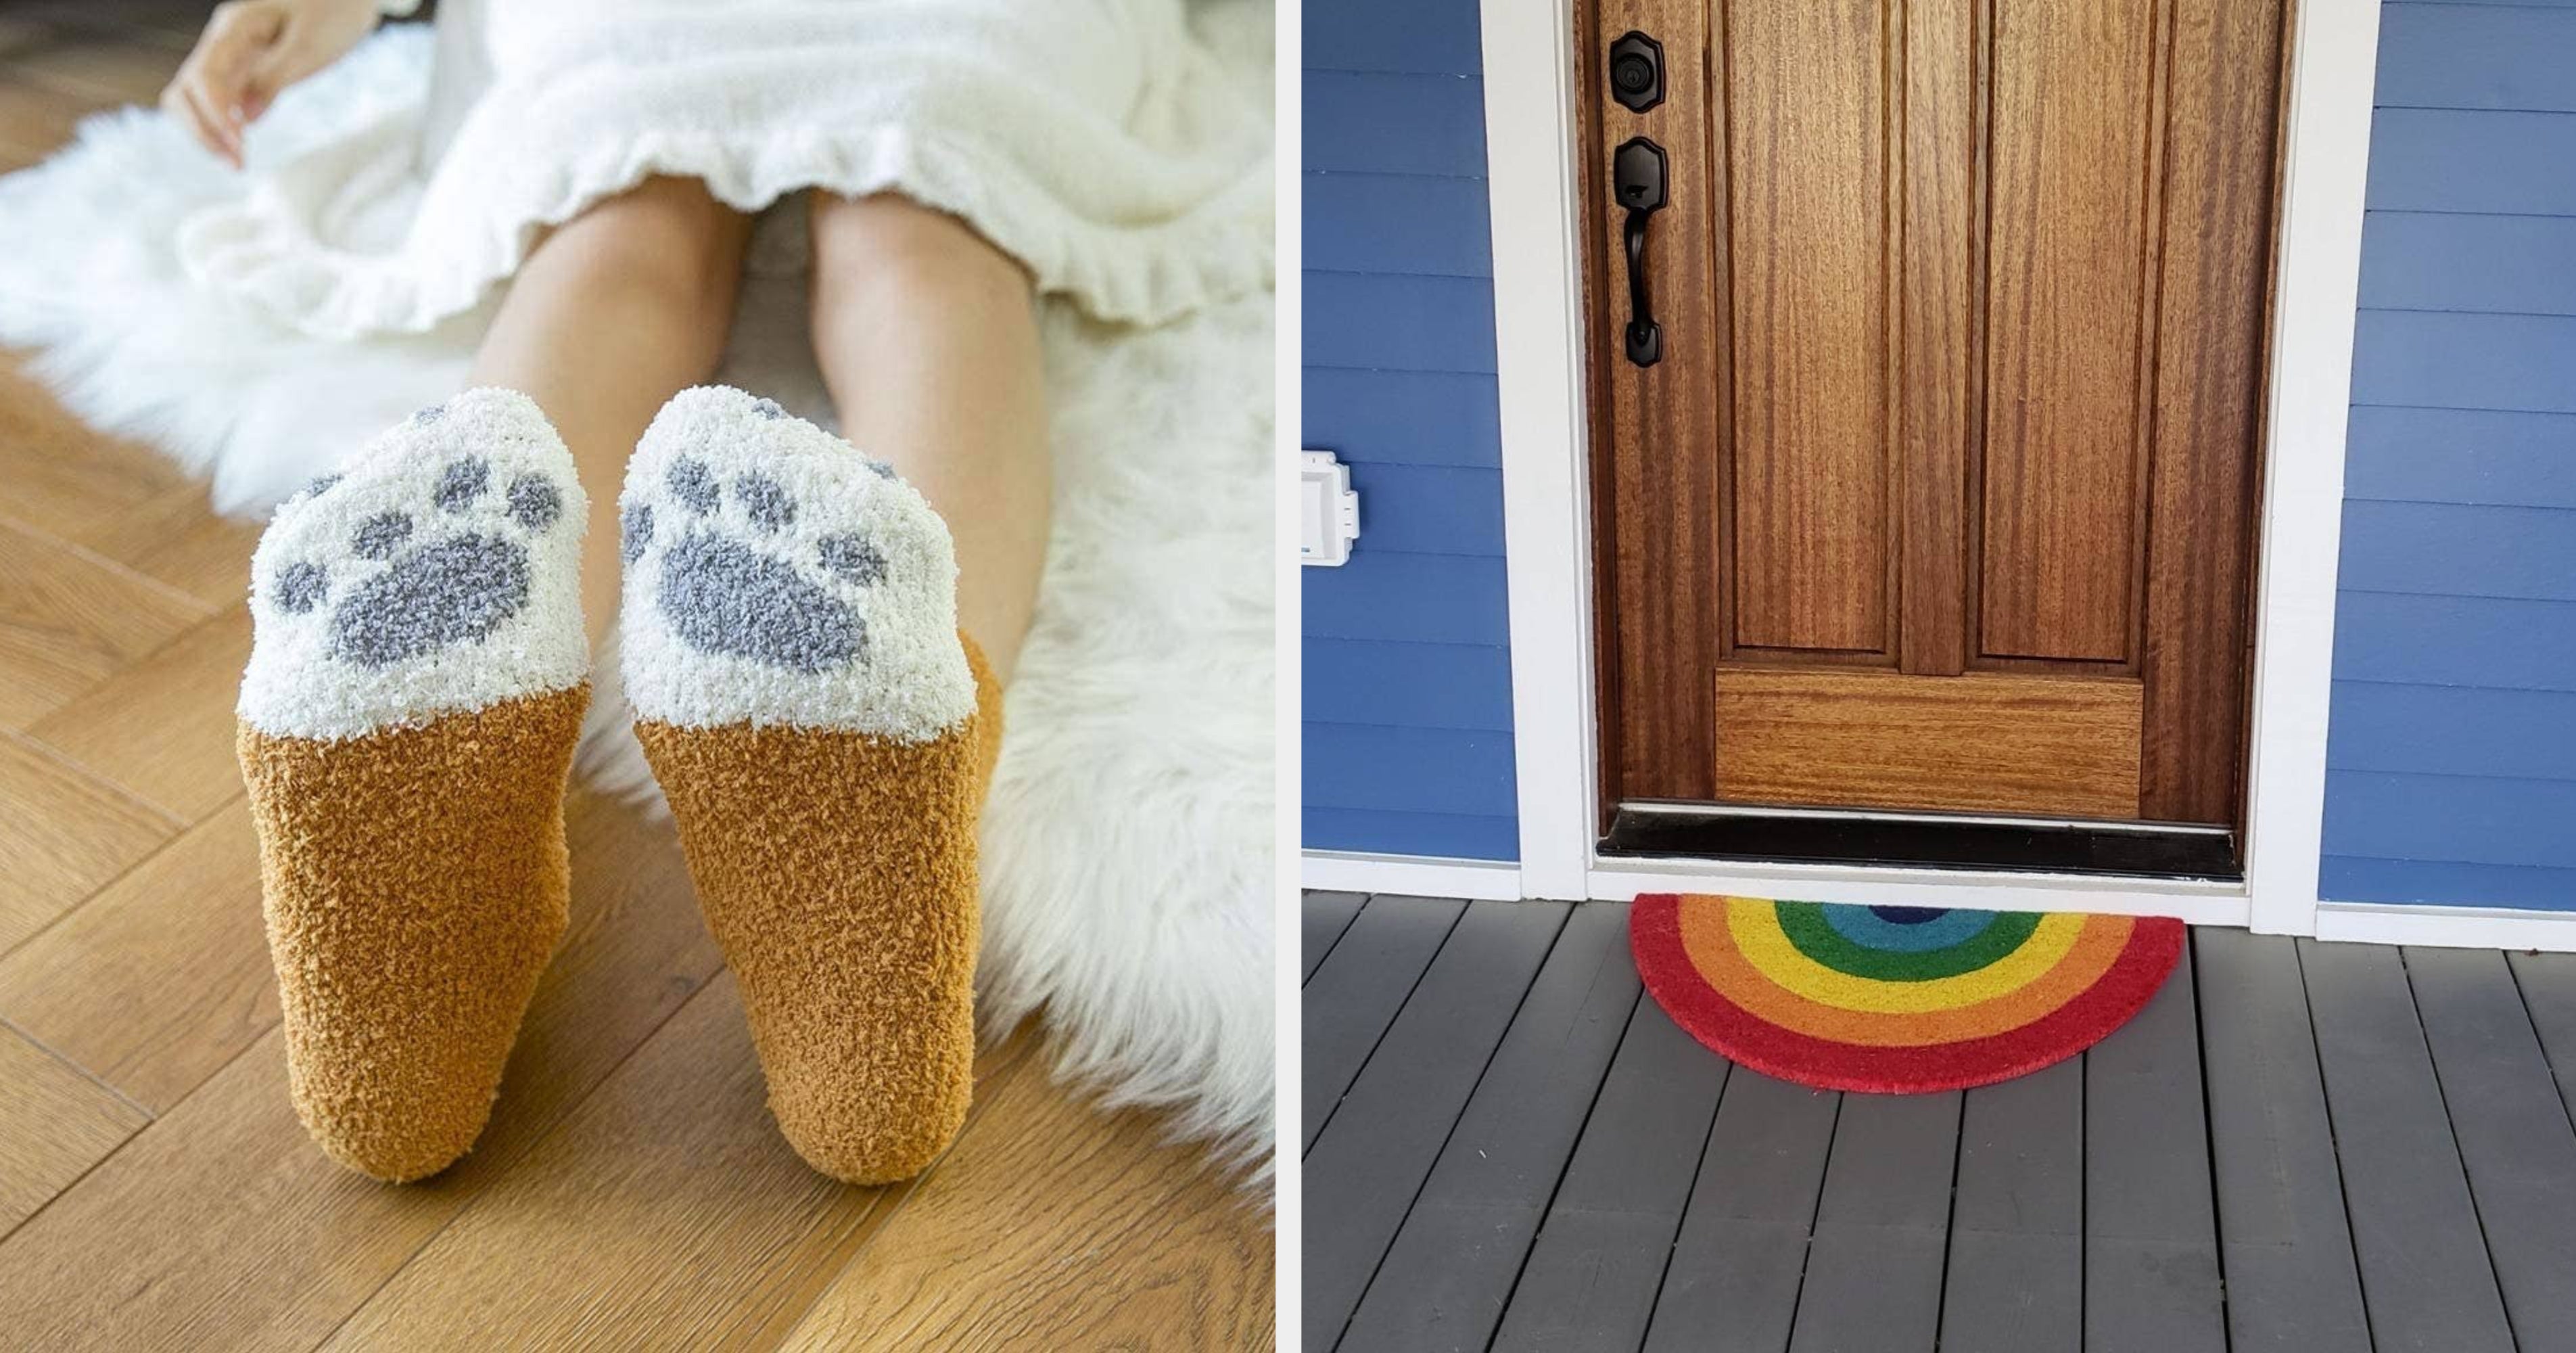 40 Unexpected Last-Minute Gifts That'll Put Santa To Shame